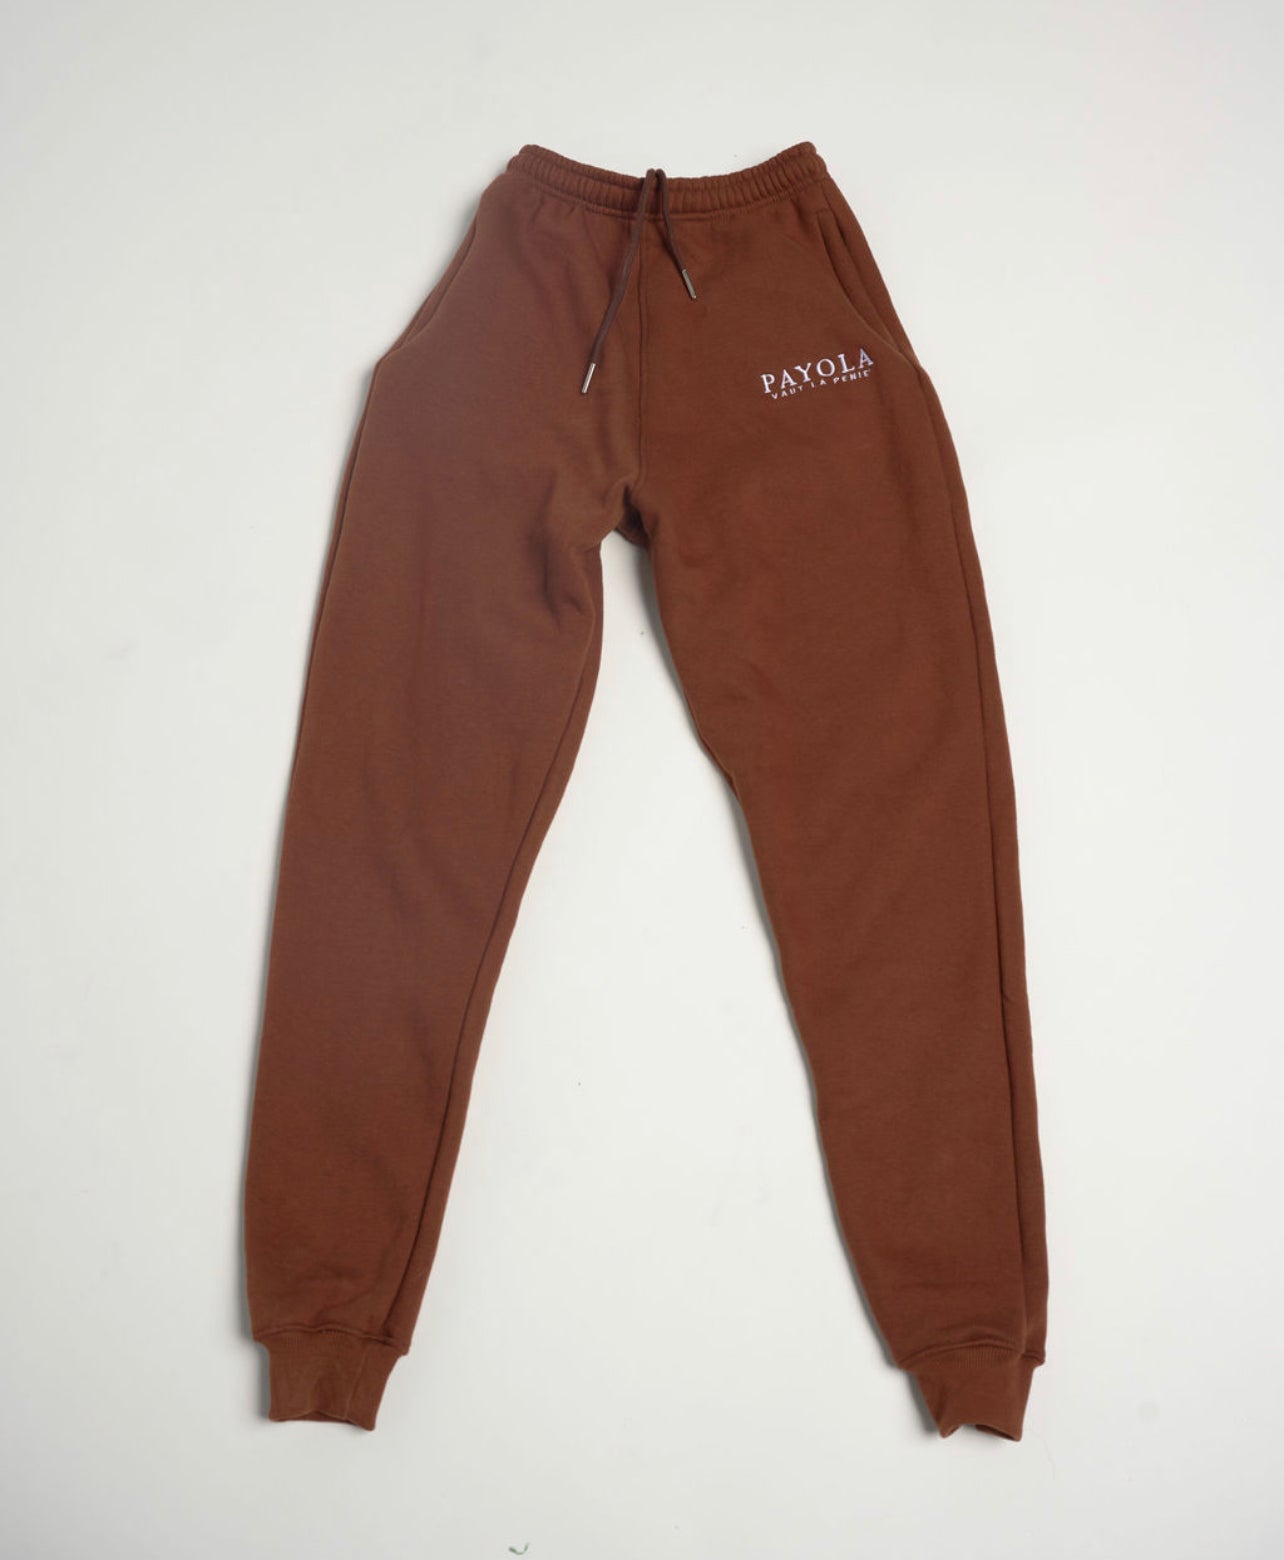 Payola Essential Jogger Set (Brown)